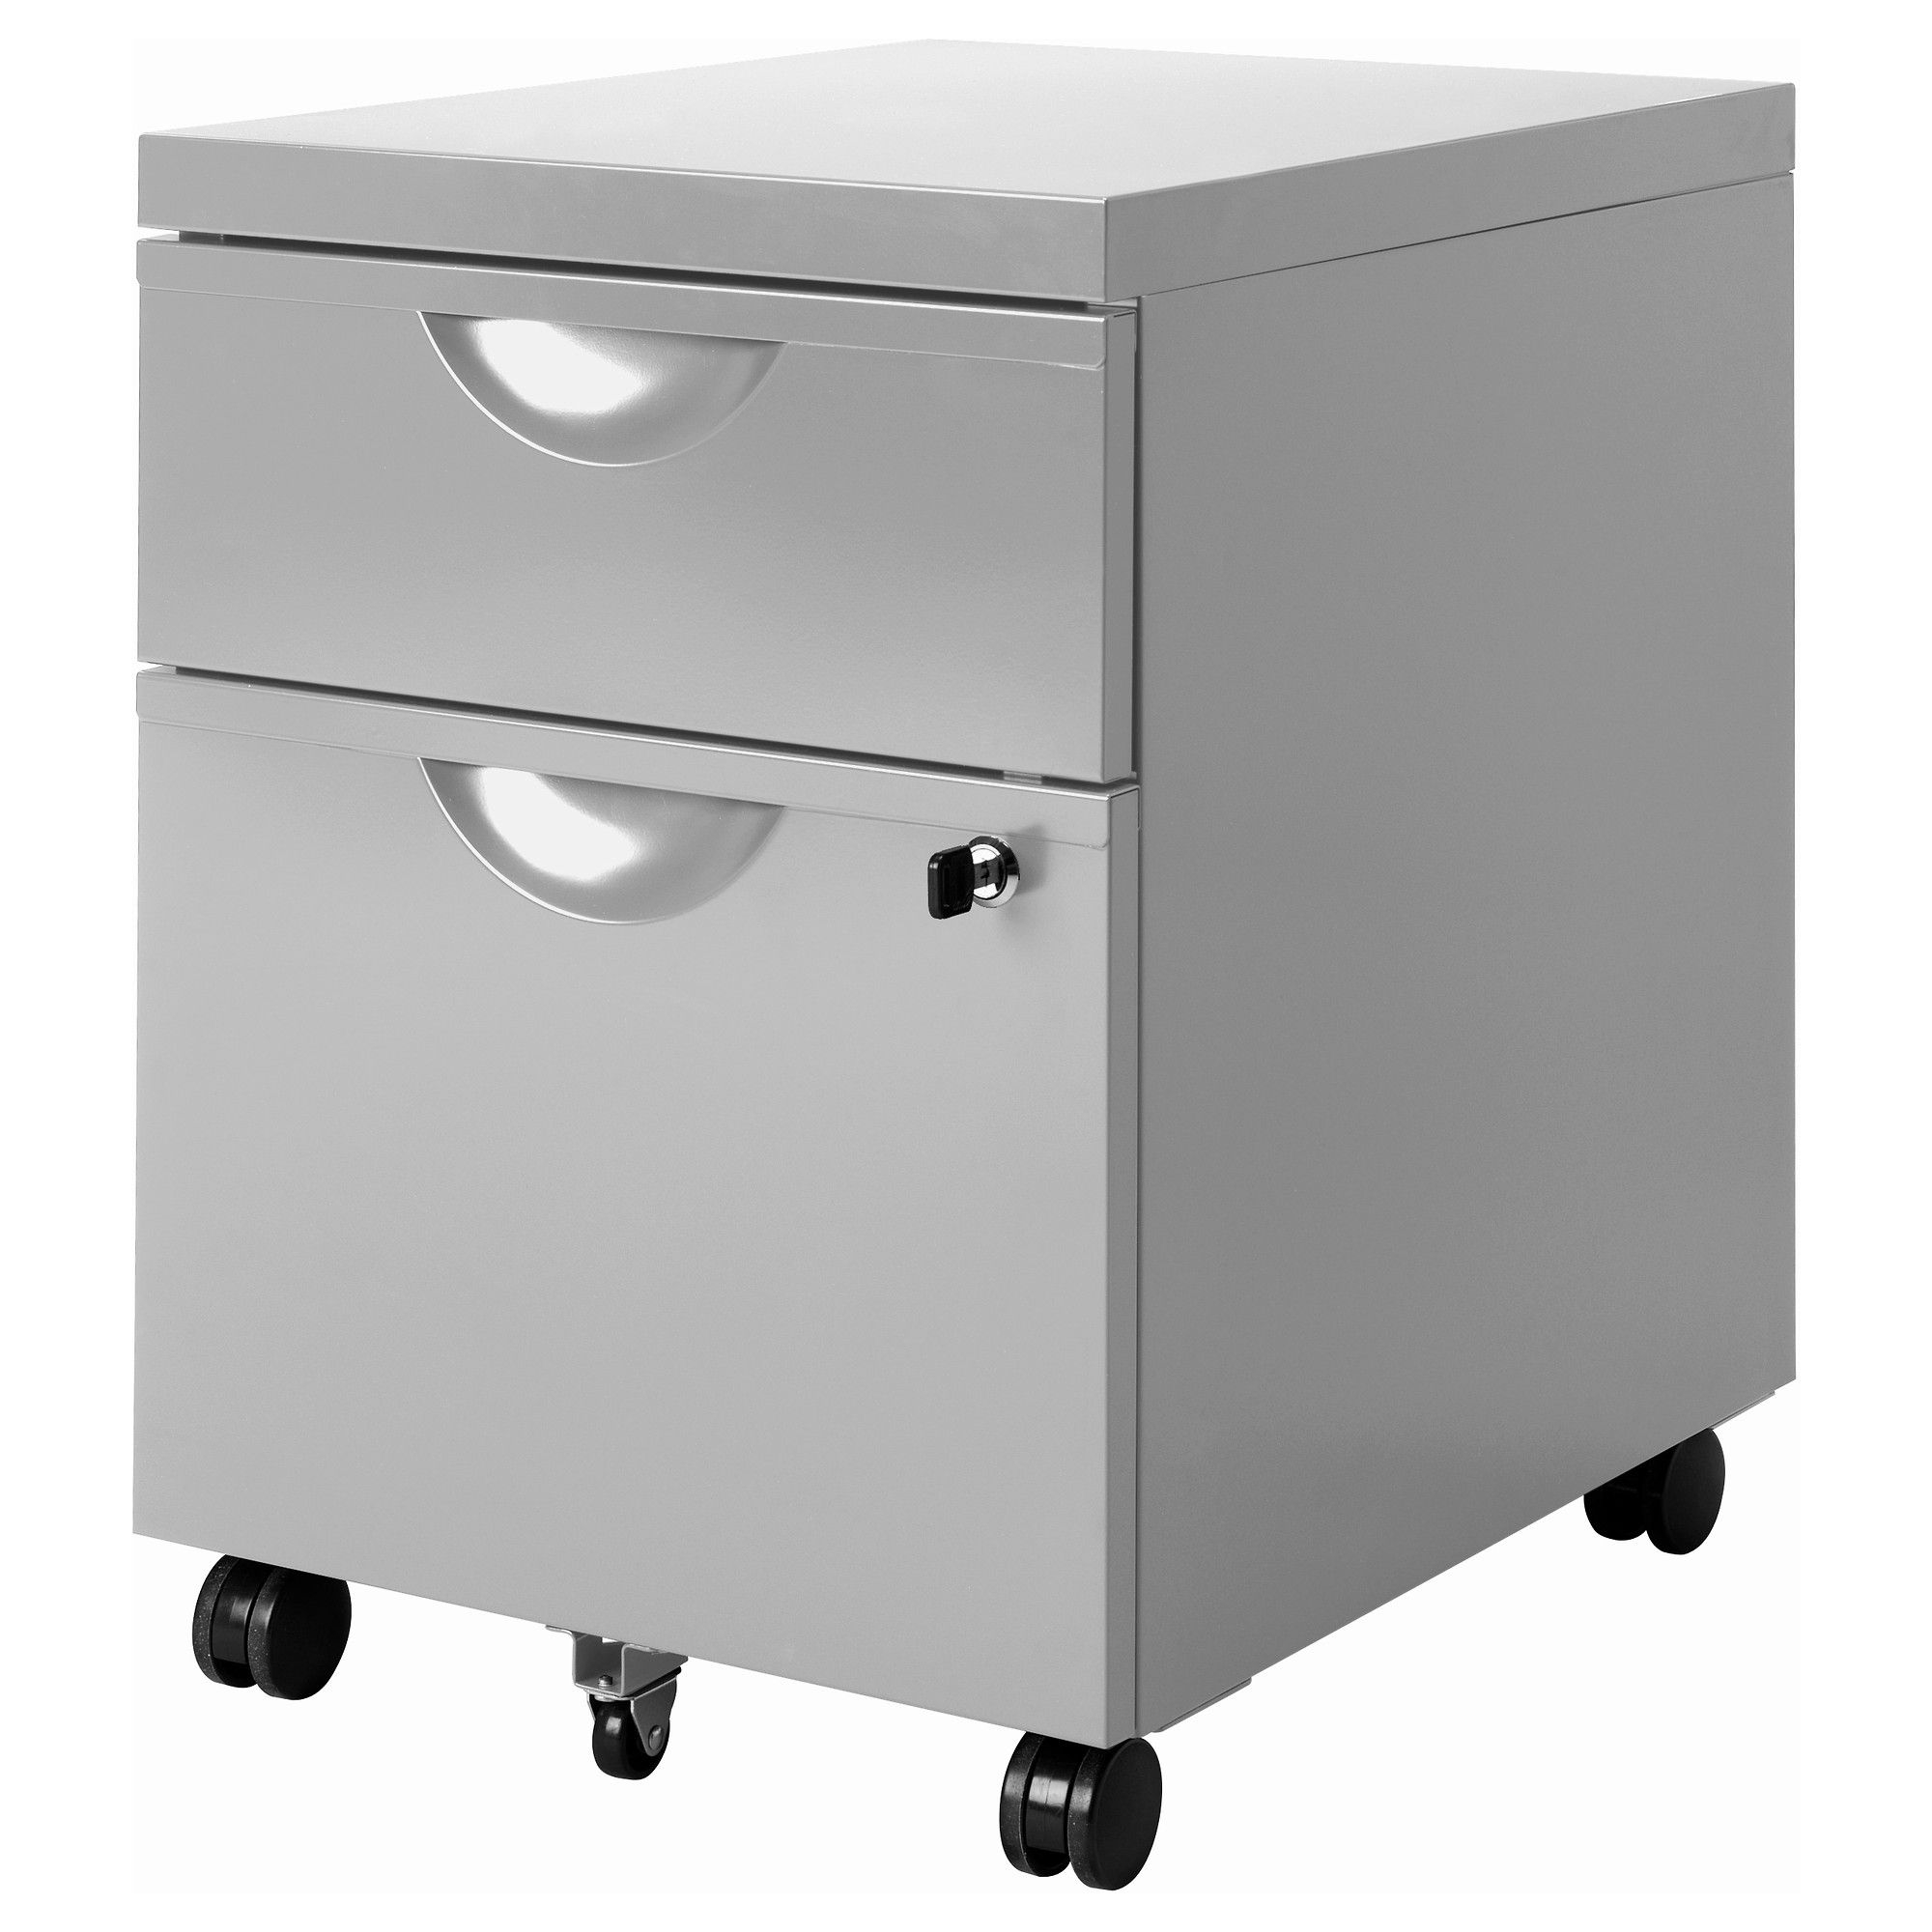 Furniture And Home Furnishings New Clinic Filing Cabinet Drawer throughout size 2000 X 2000